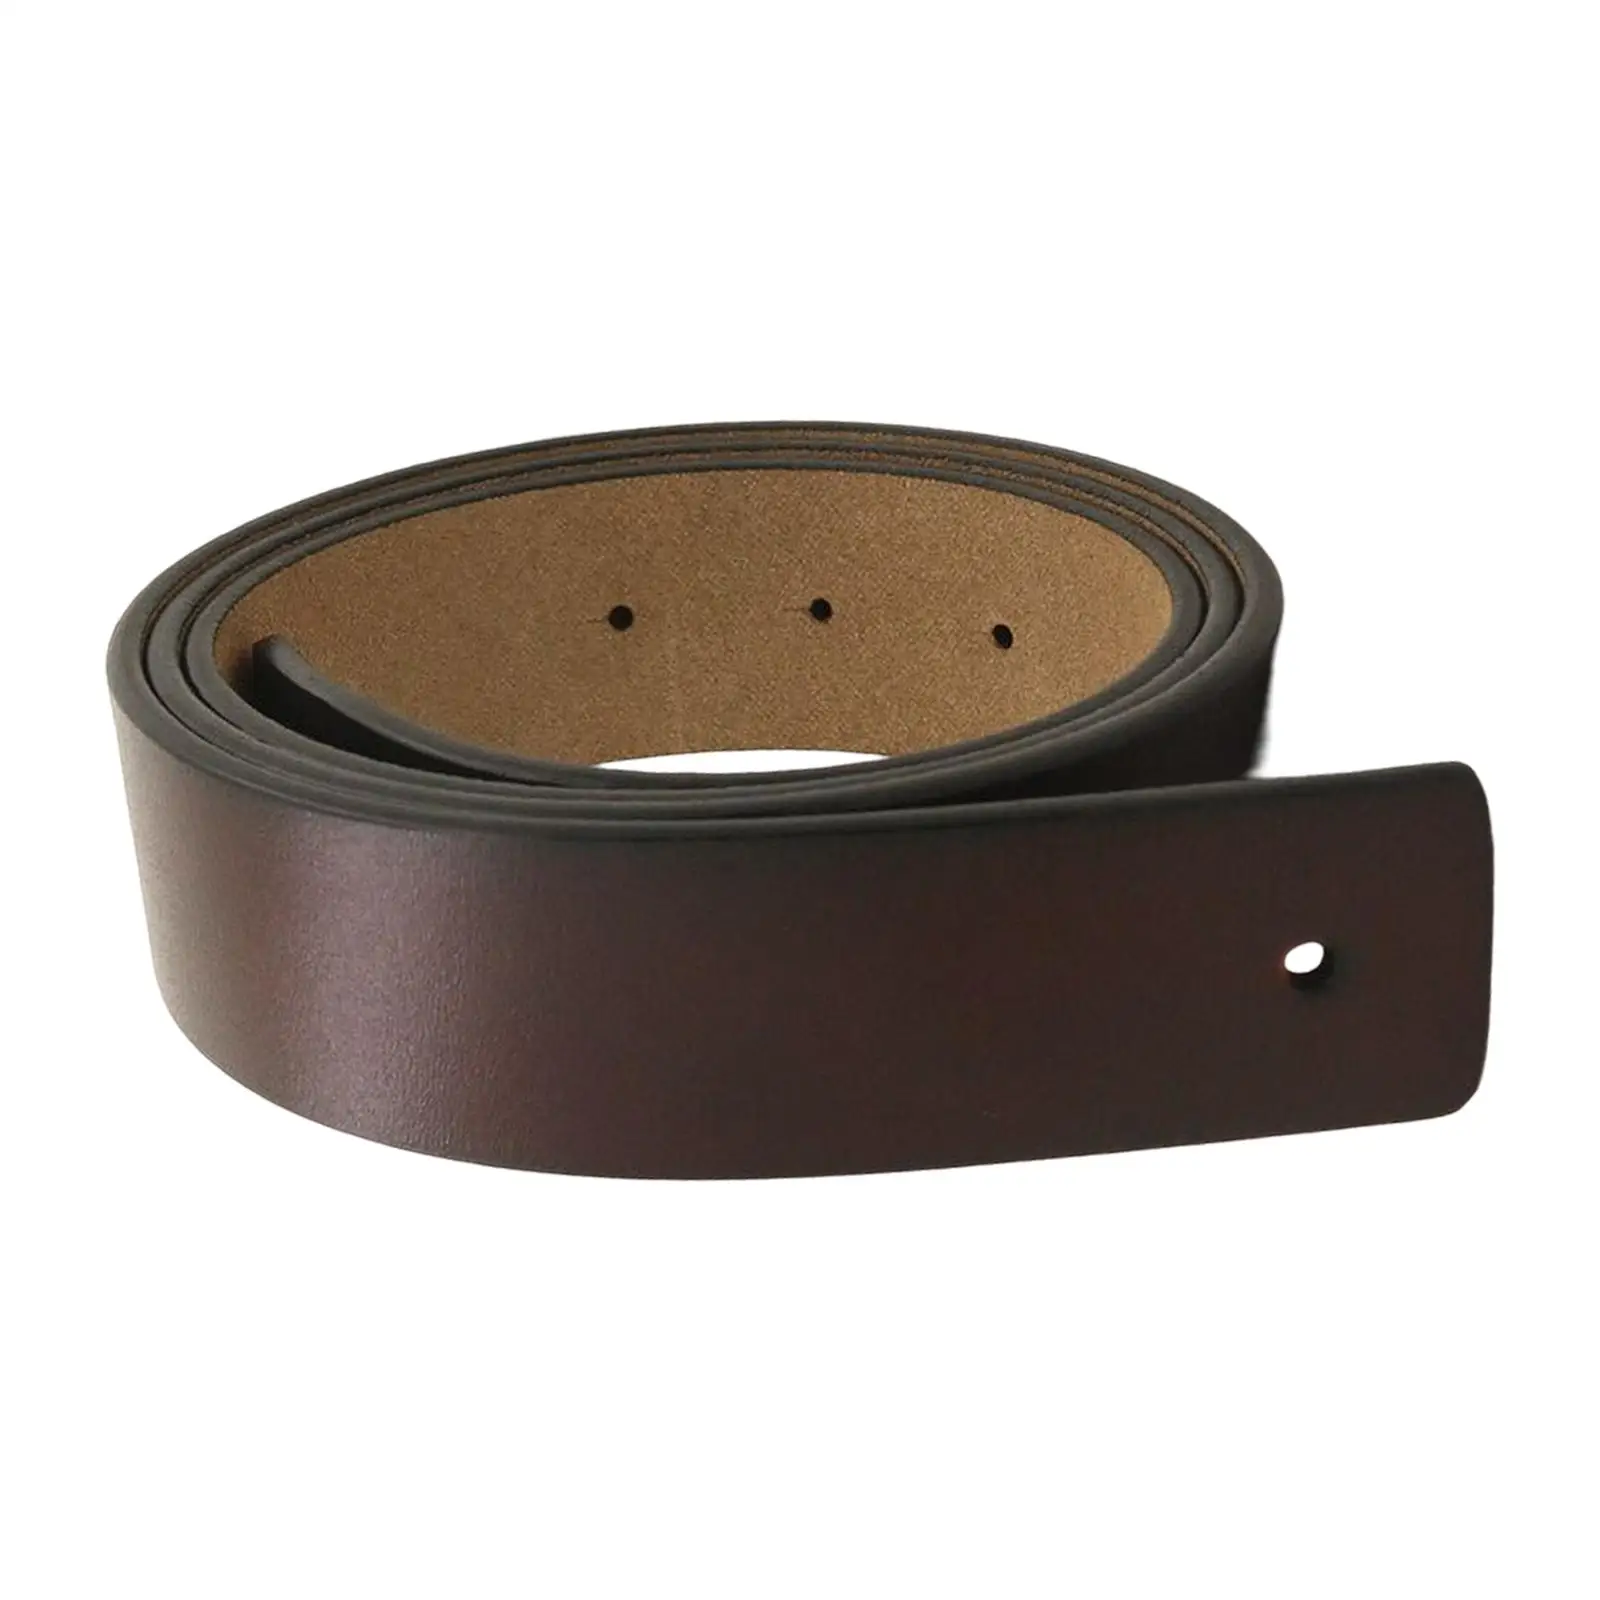 Antique PU Leather Belt for Men Without Buckle Casual Dress Belts Waistband for DIY Craft Projects Automatic Ratchet Buckles